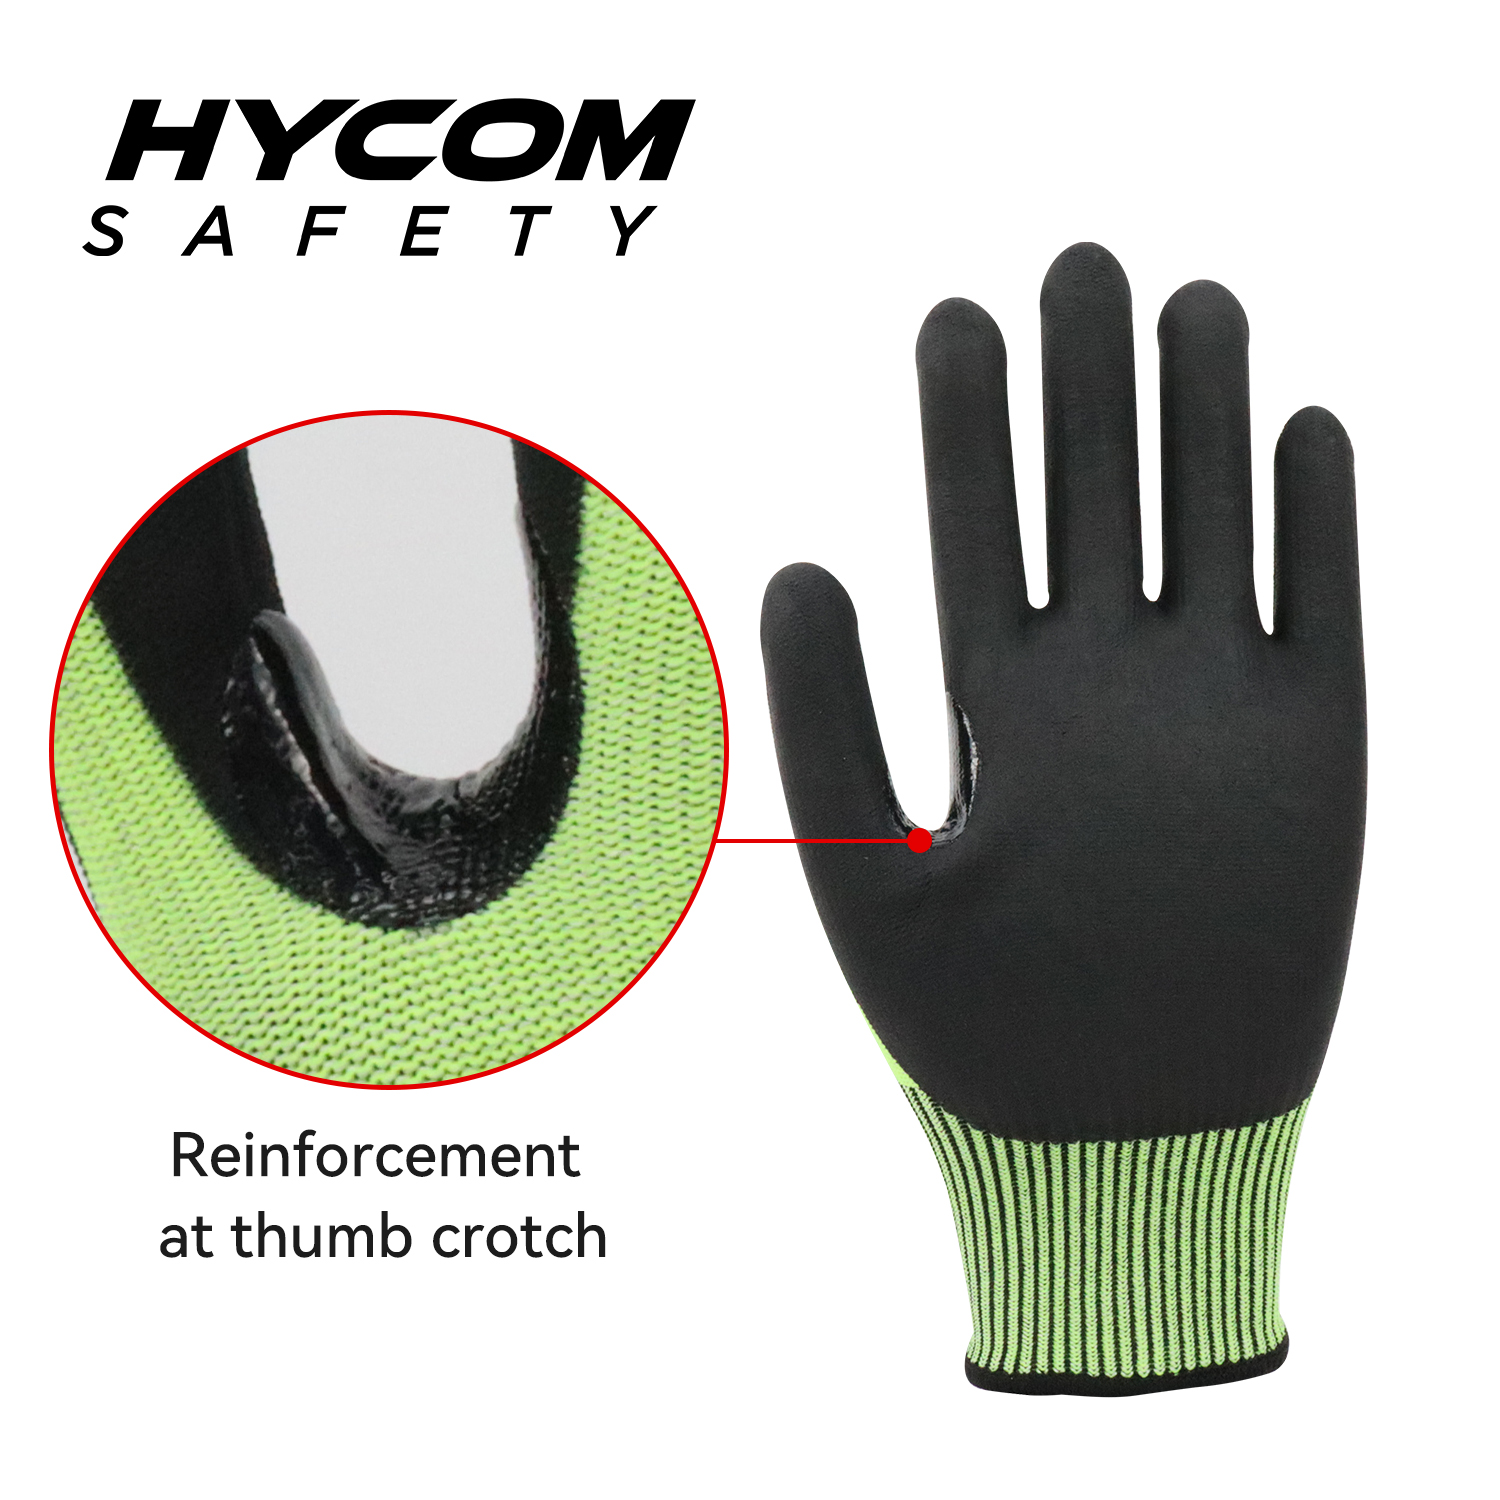 HYCOM 13G ANSI 5 Cut Resistant Glove with Palm Foam nitrile Coating PPE Gloves